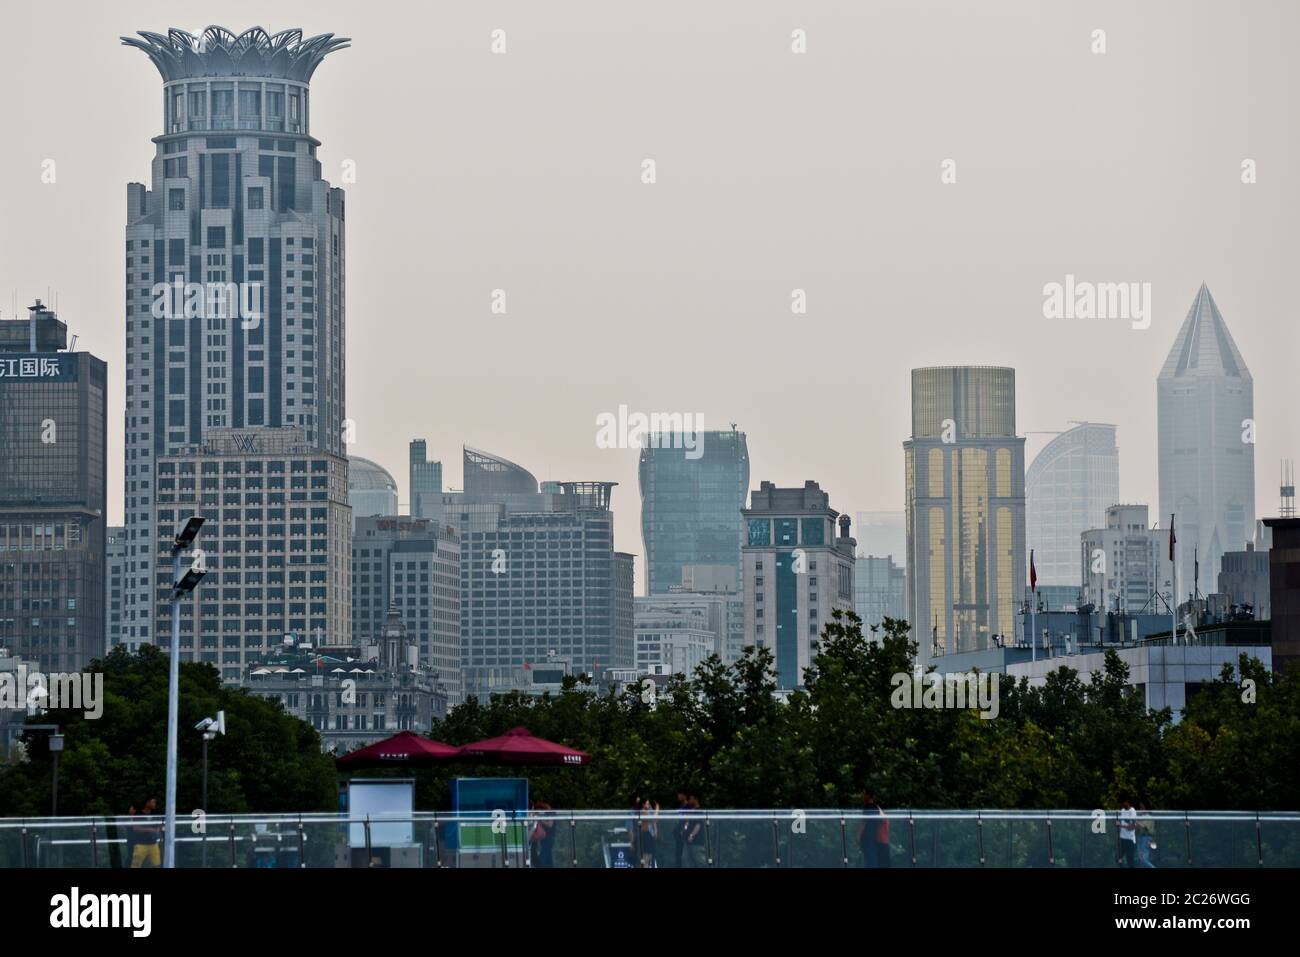 Shanghai skyscrapers in Huangpu district, with the Bund Center on the left. China Stock Photo